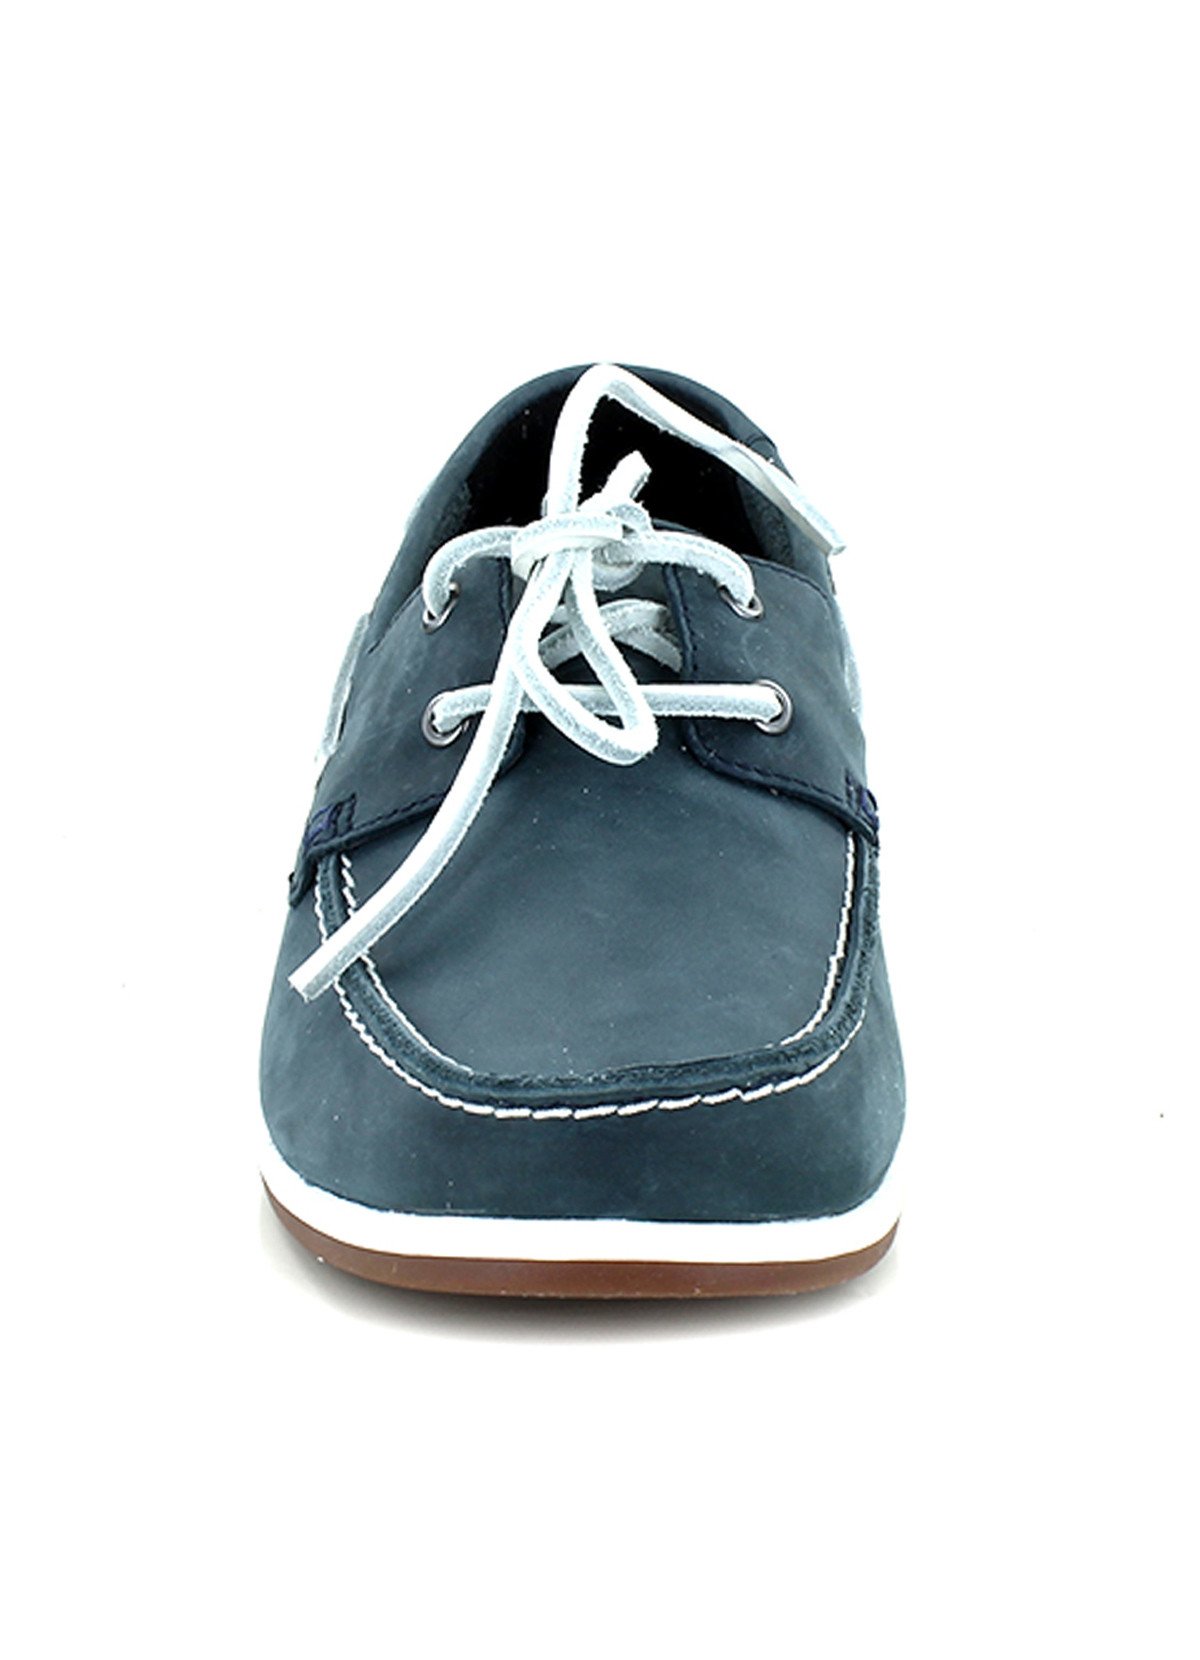 Clarks PICKWELL SAIL NAVY